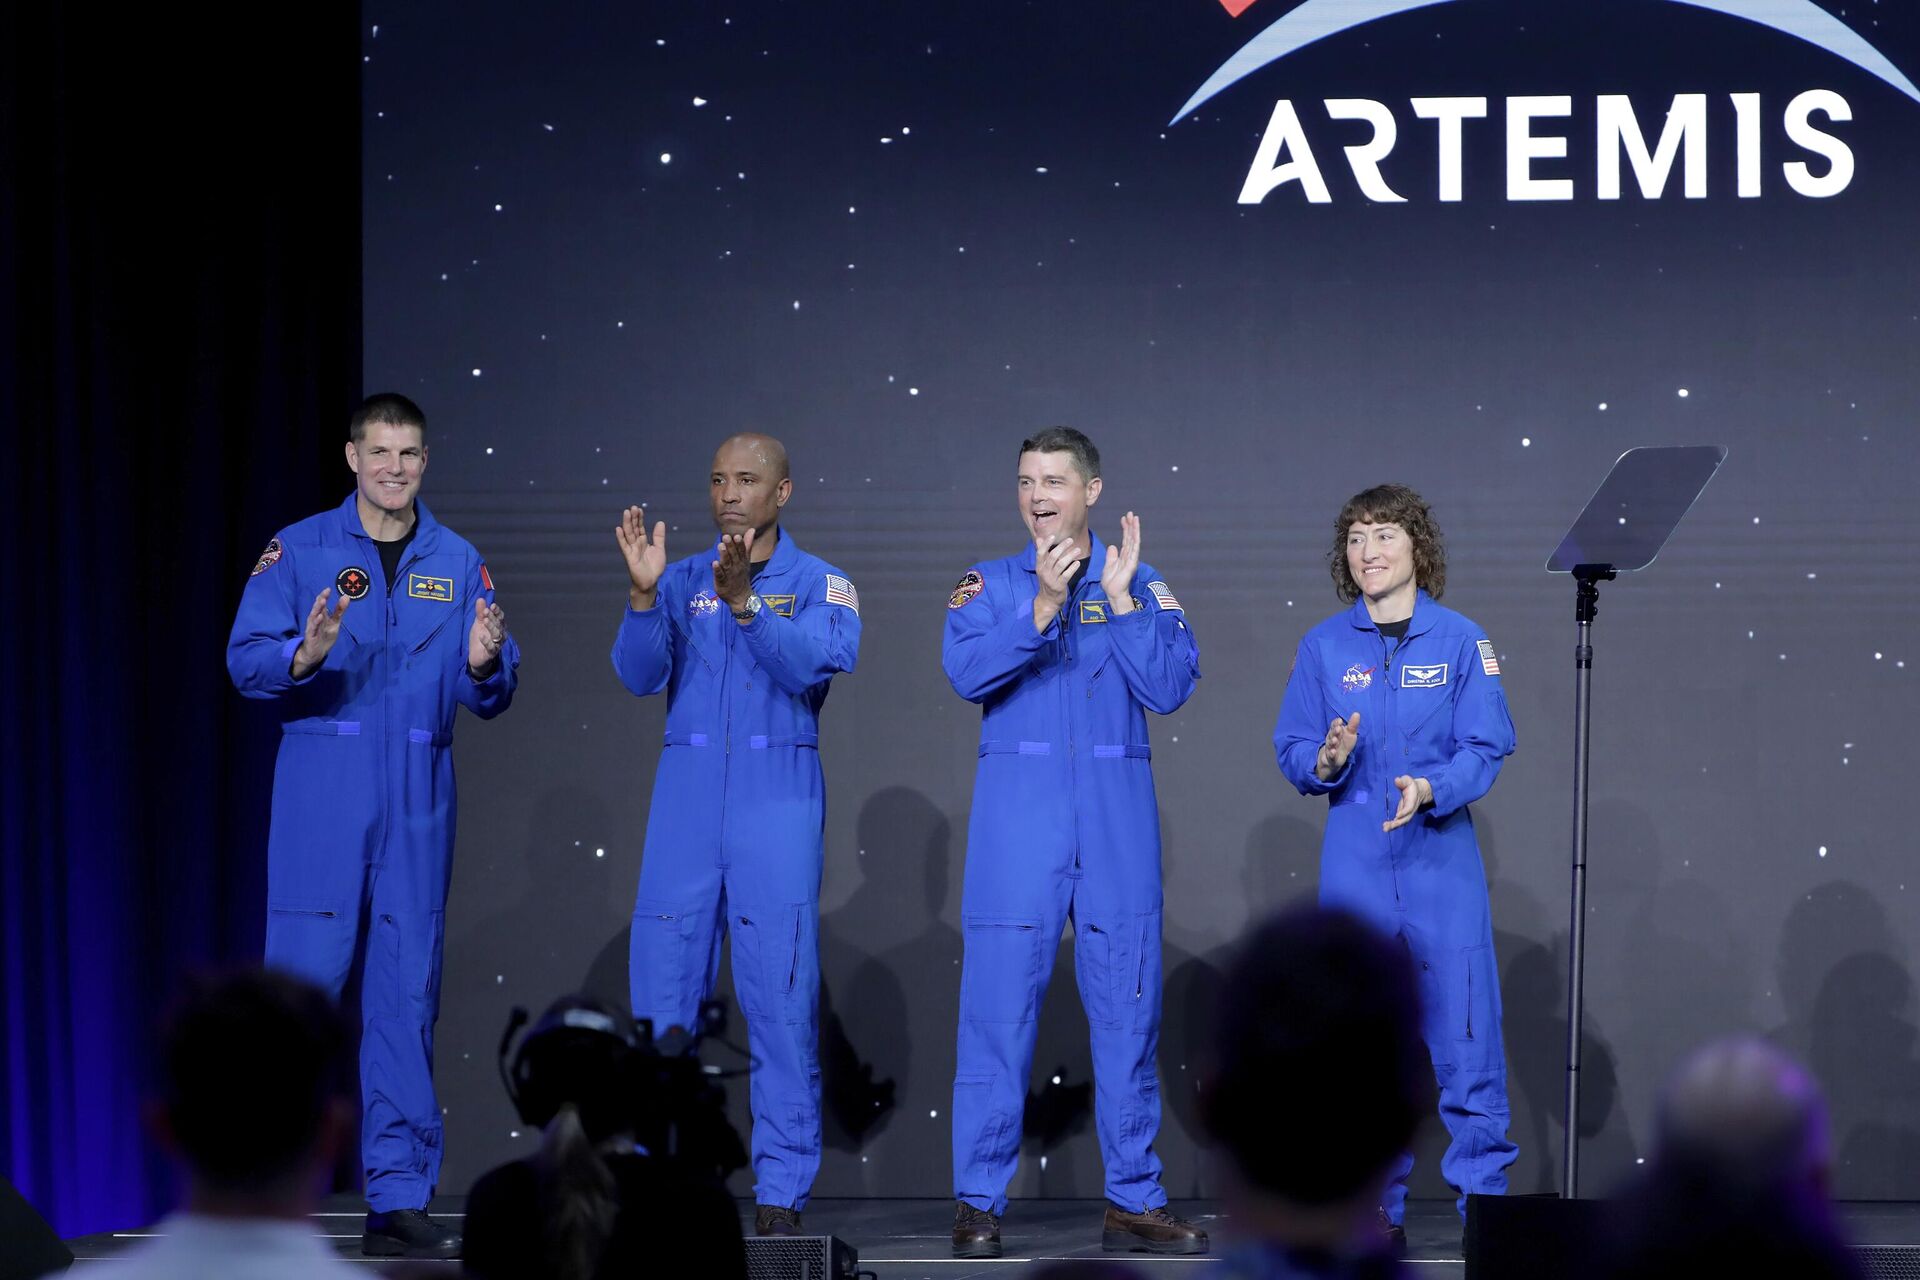 From left, Jeremy Hansen, Victor Glover, Reid Wiseman and Christina Hammock Koch, celebrate on stage as they are announced as the Artemis II crew during a NASA ceremony naming the four astronauts who will fly around the moon by the end of next year, at a ceremony held in the NASA hangar at Ellington airport Monday, April 3, 2023, in Houston. This crew will not land or even go into lunar orbit. Rather, they will fly around the moon and head straight back to Earth. The 10-day mission will be a prelude to a lunar landing a year later. - Sputnik International, 1920, 18.04.2023